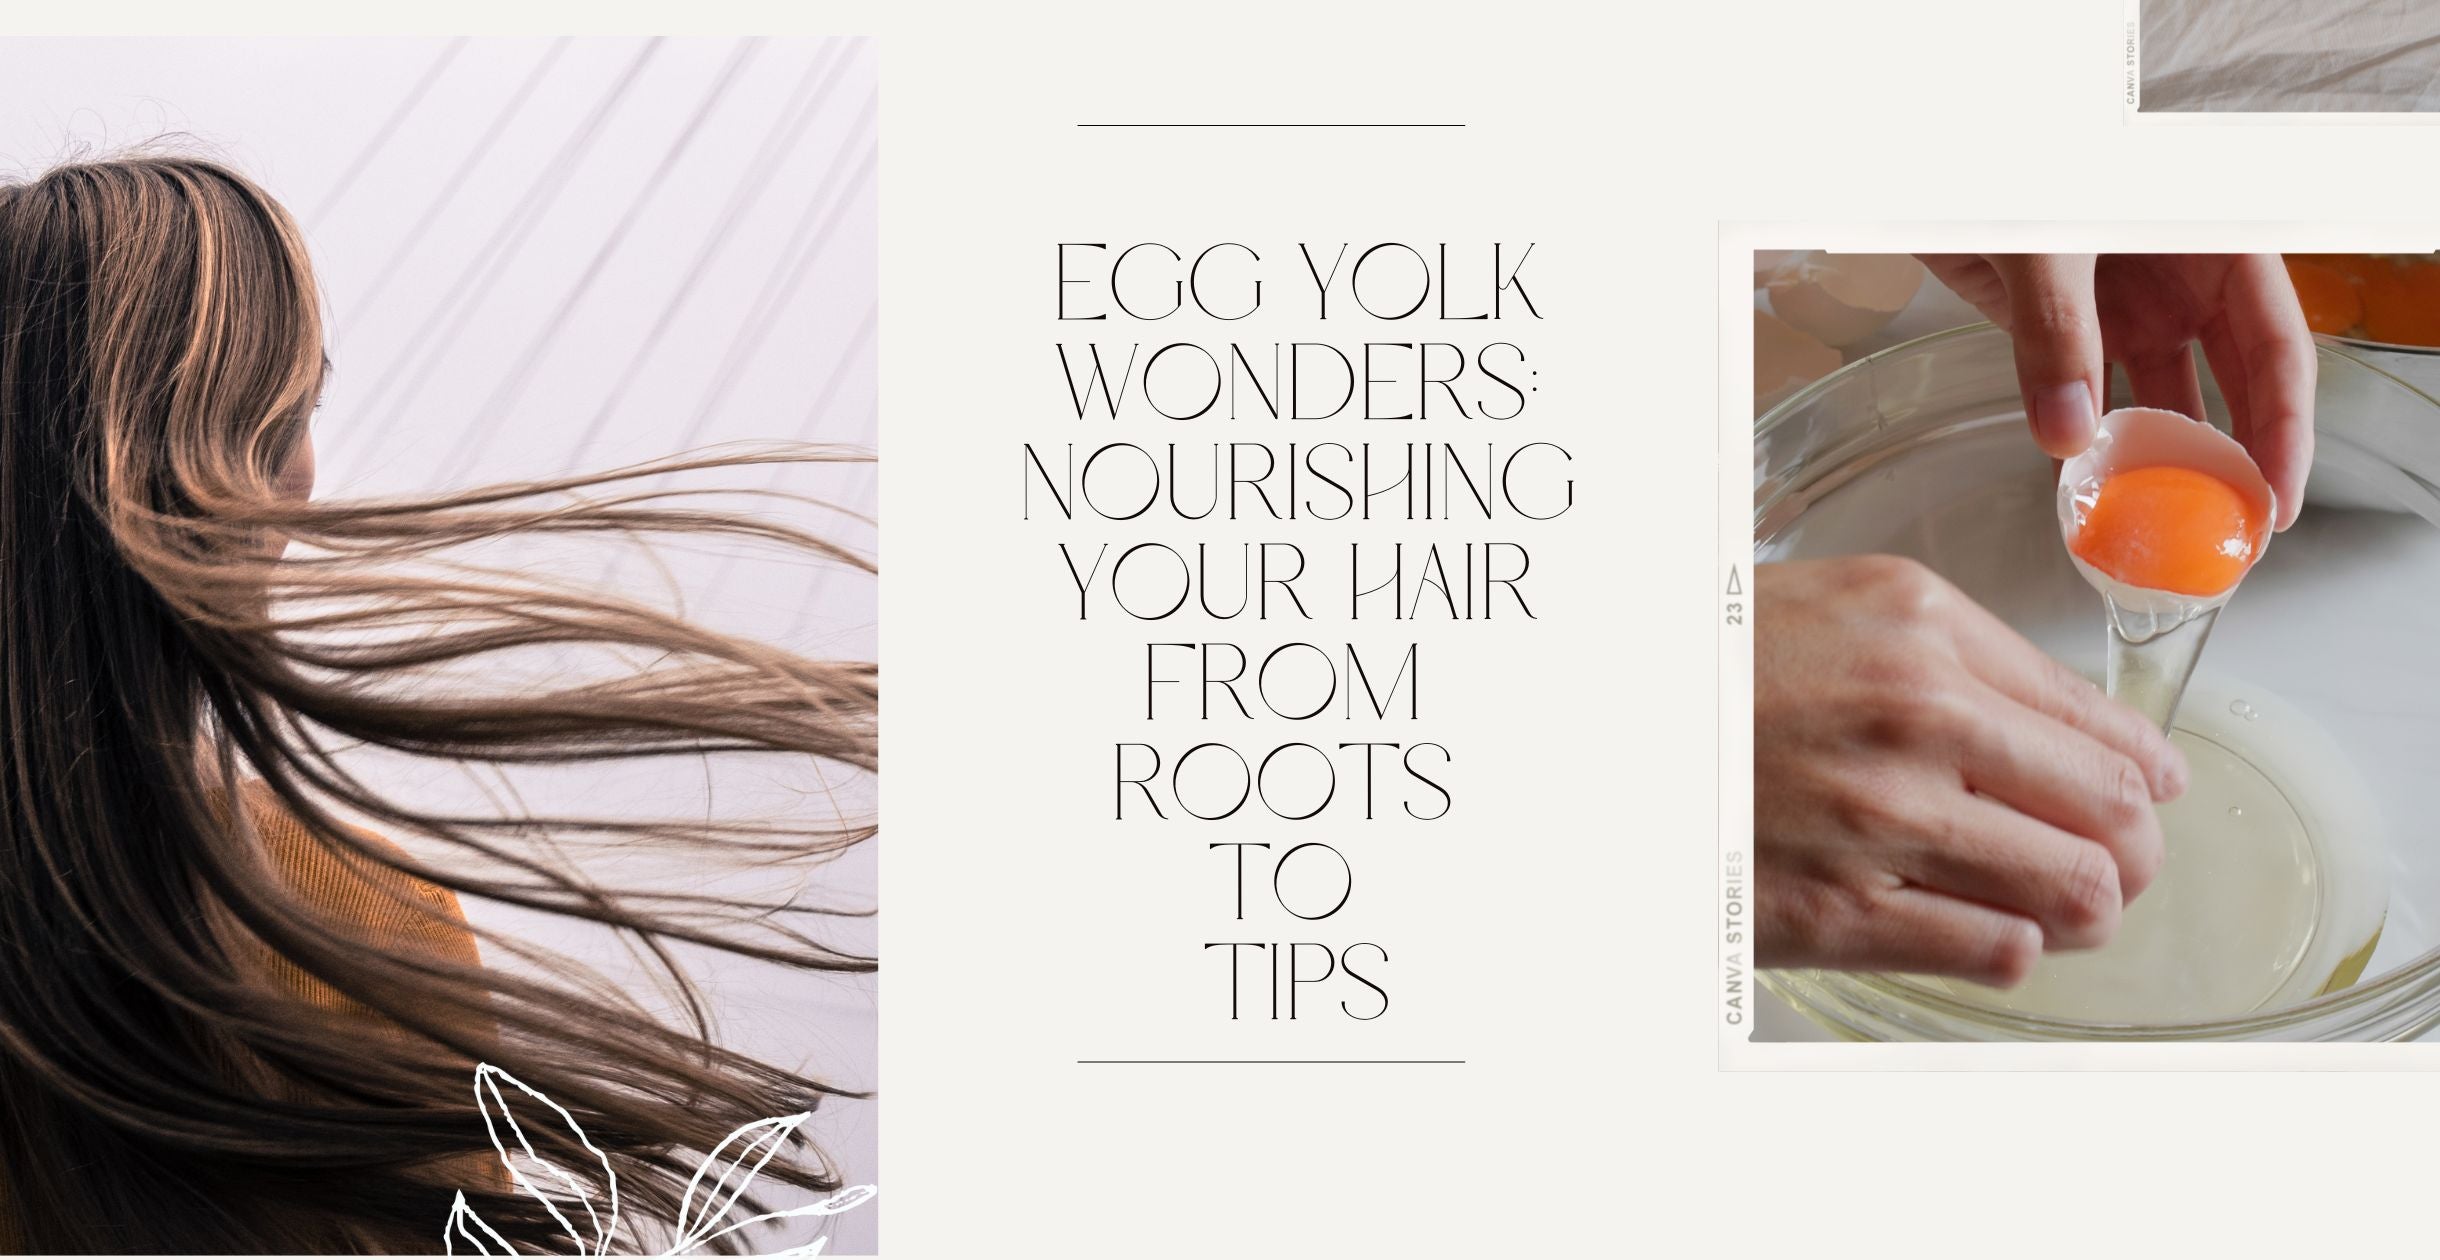 Egg Yolk Wonders: Nourishing Your Hair from Roots to Tips